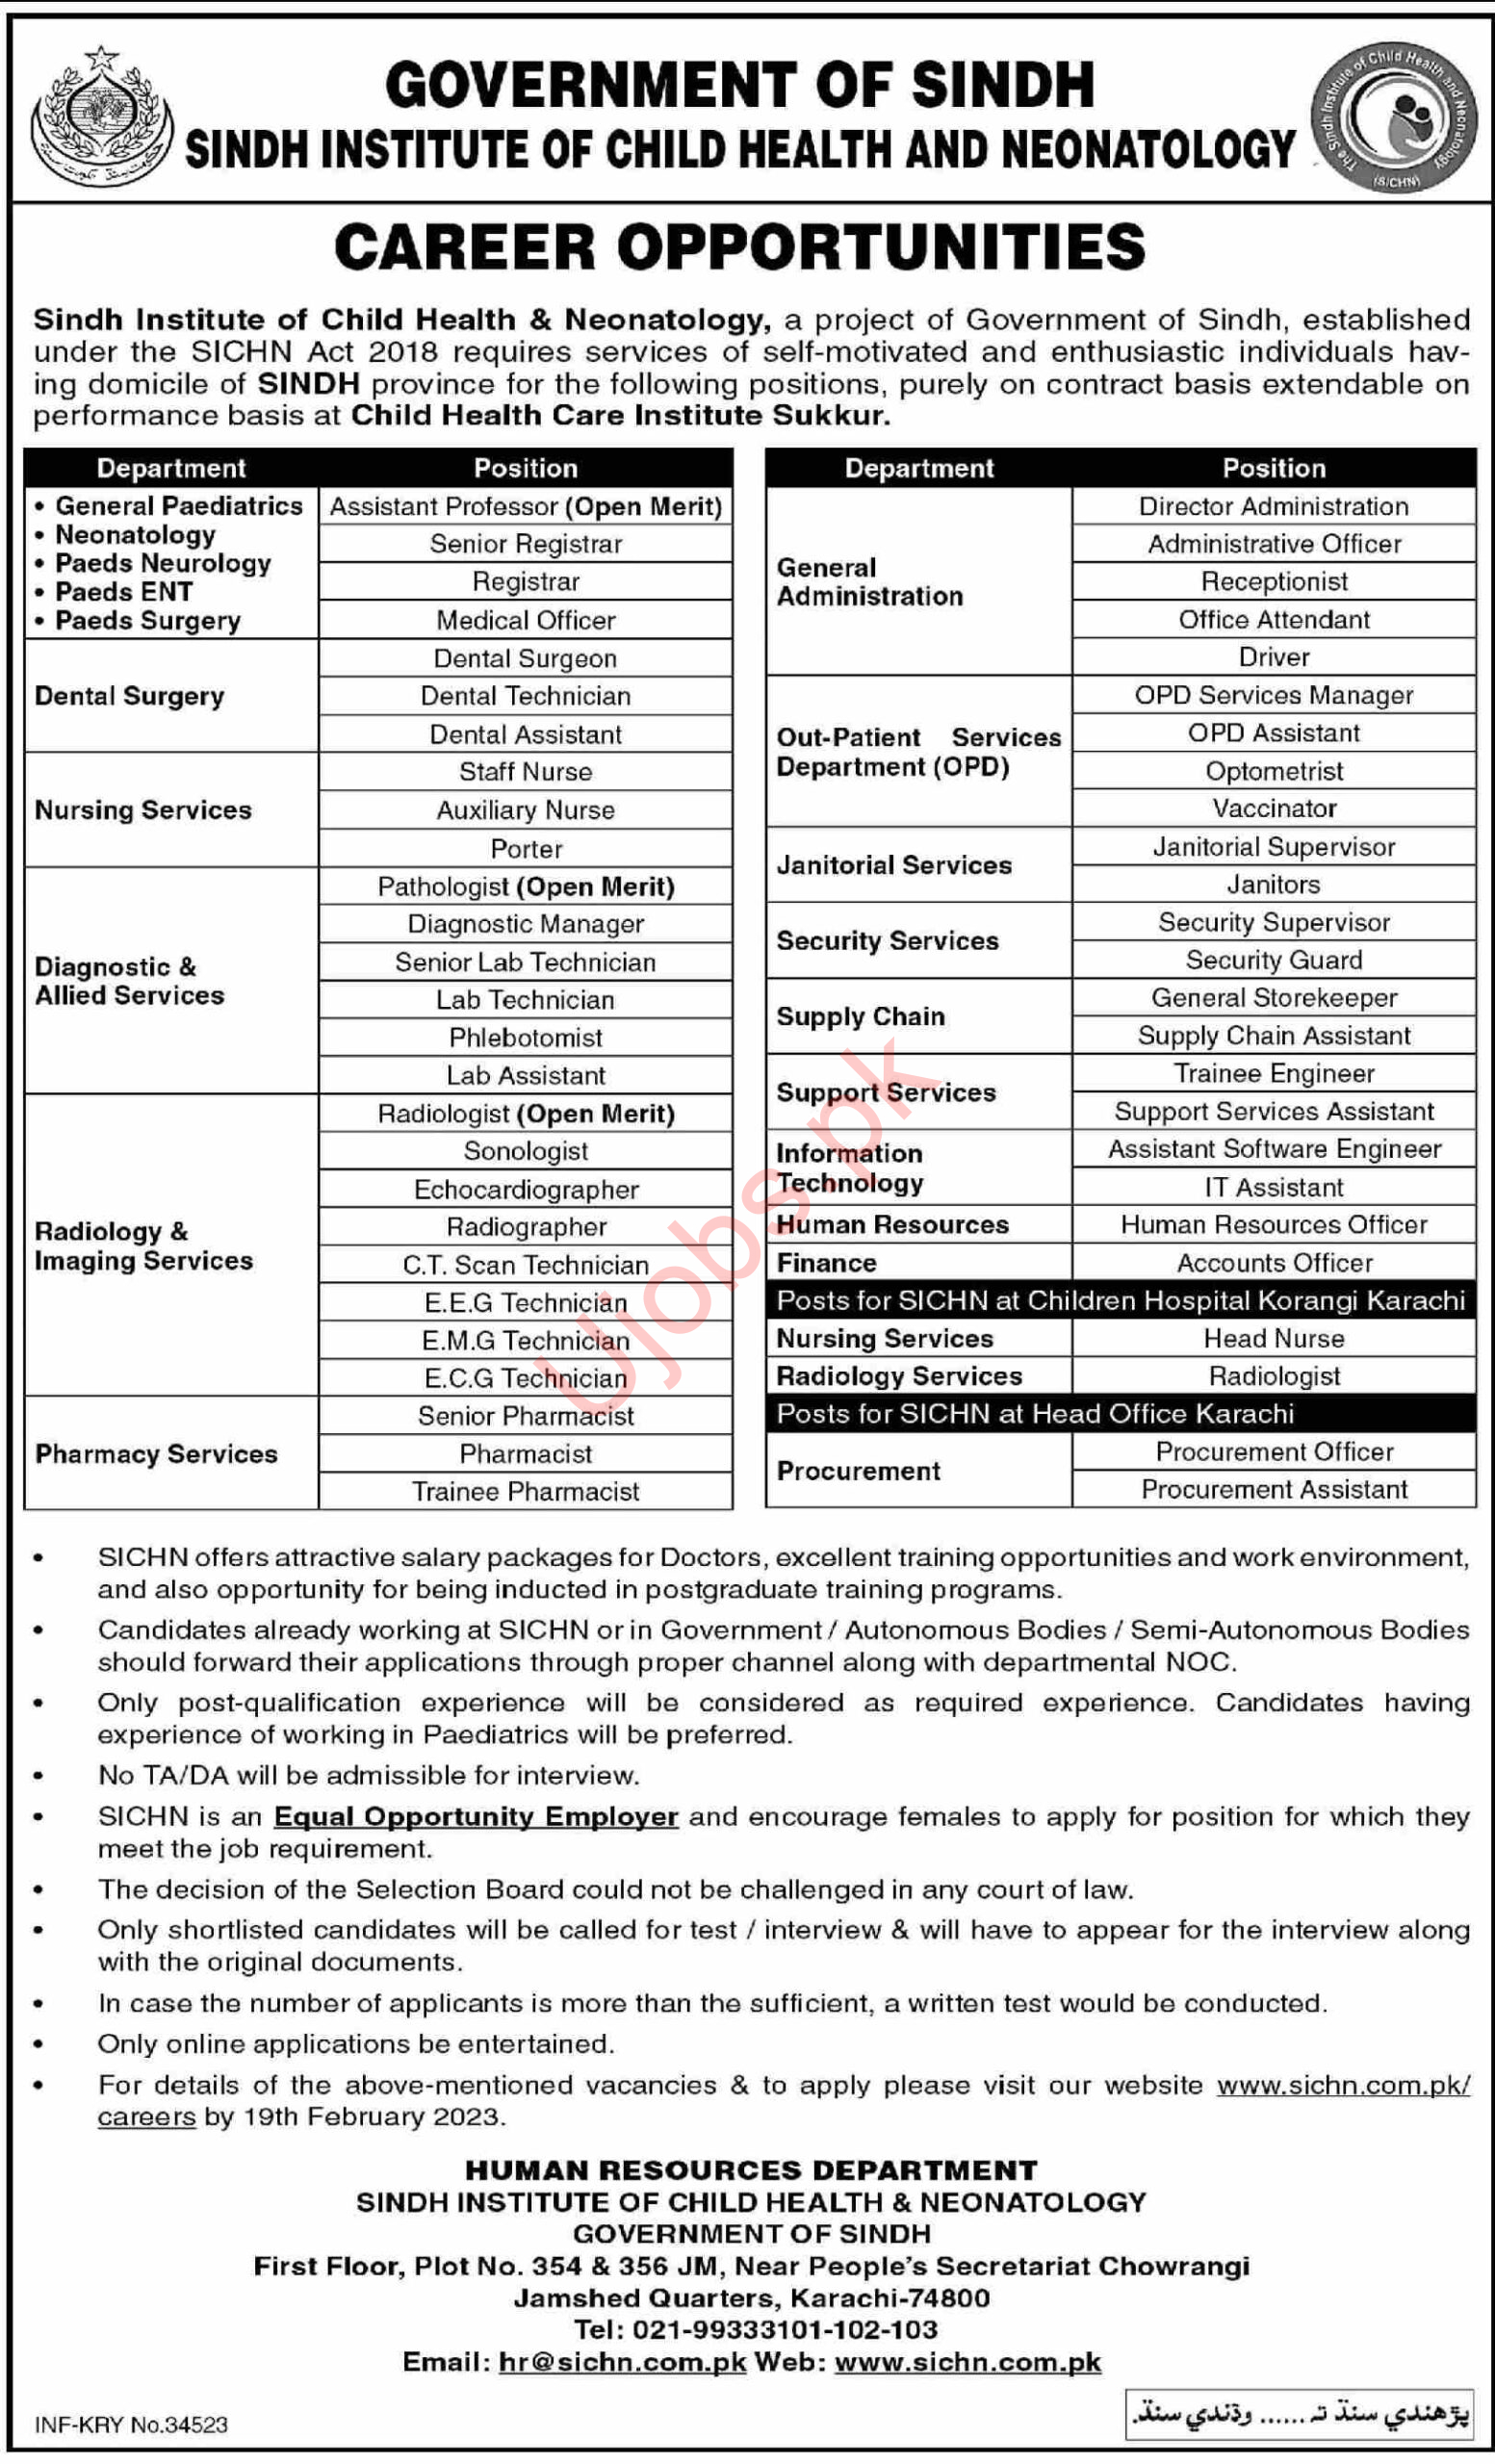 Sindh Institute of Child Health and Neonatology Sindh Jobs 2023 Advertisements